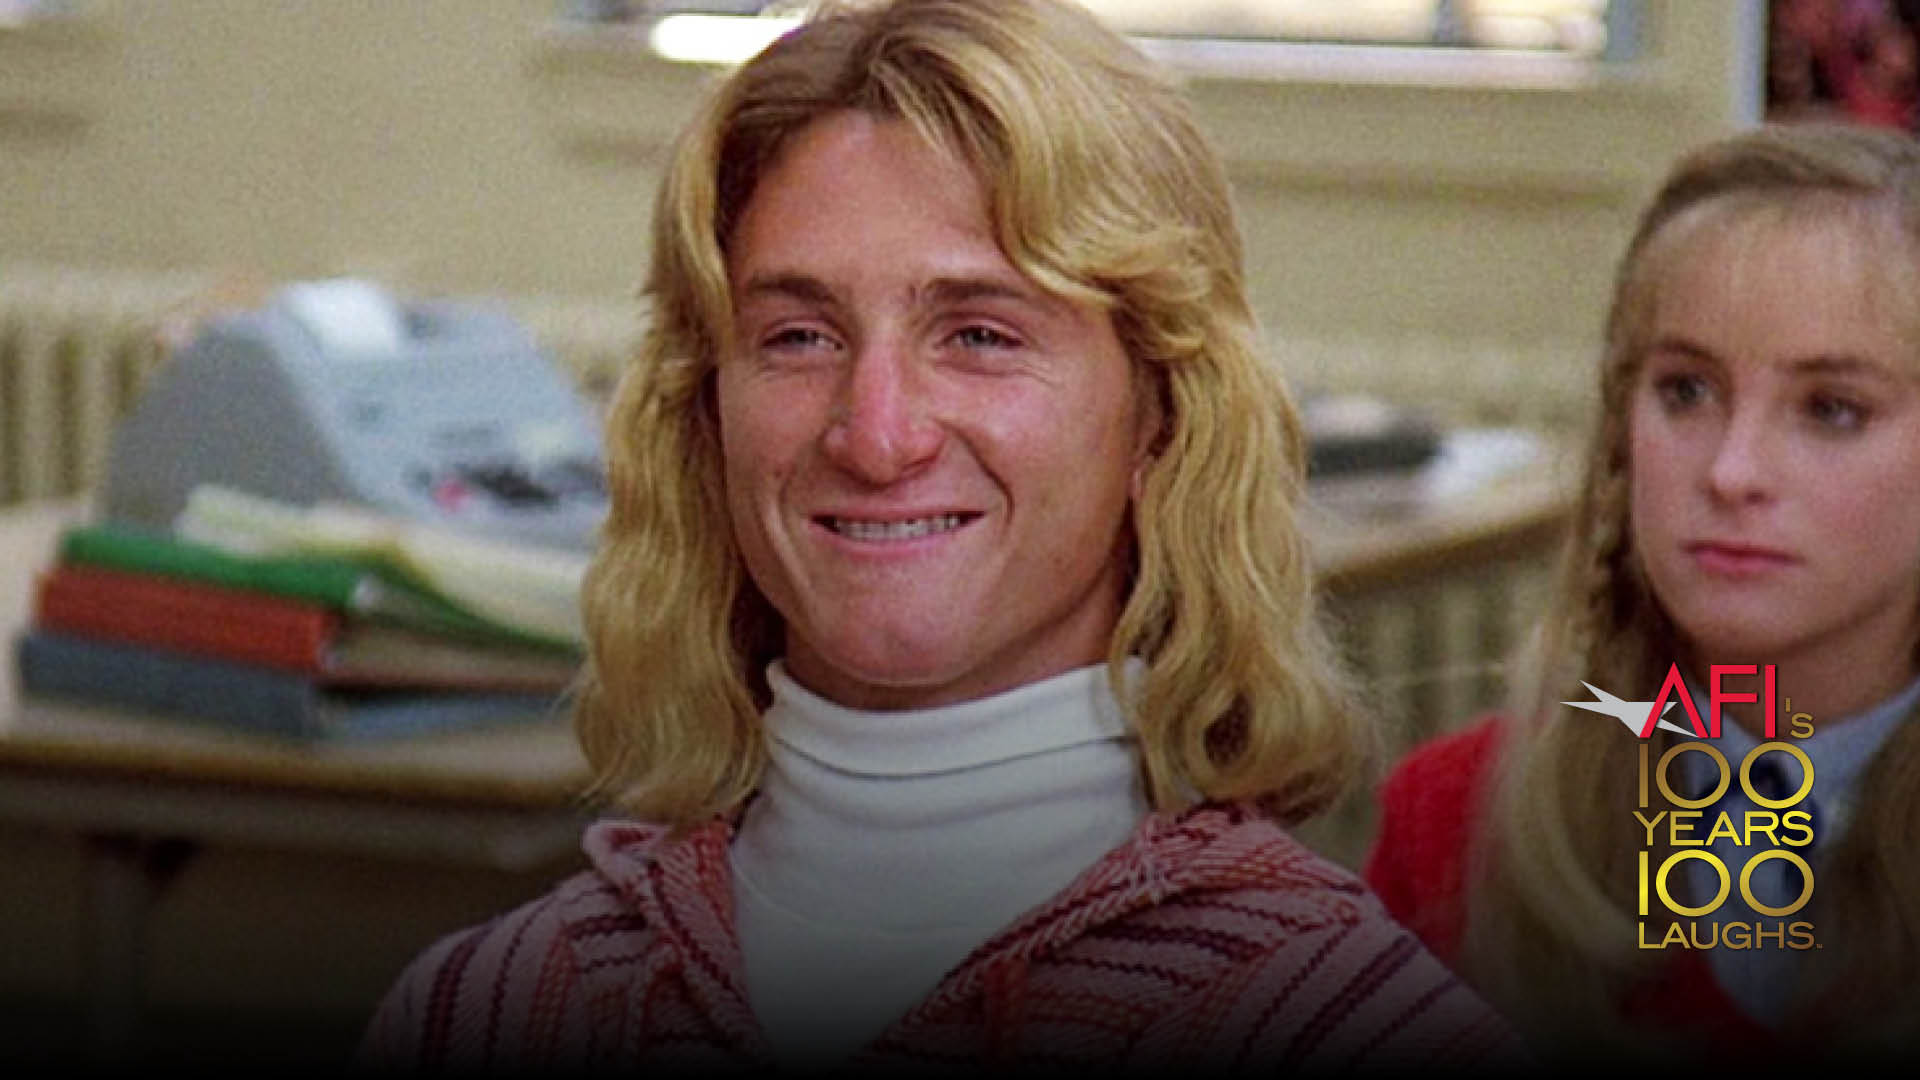 Image from FAST TIMES AT RIDGEMONT HIGH